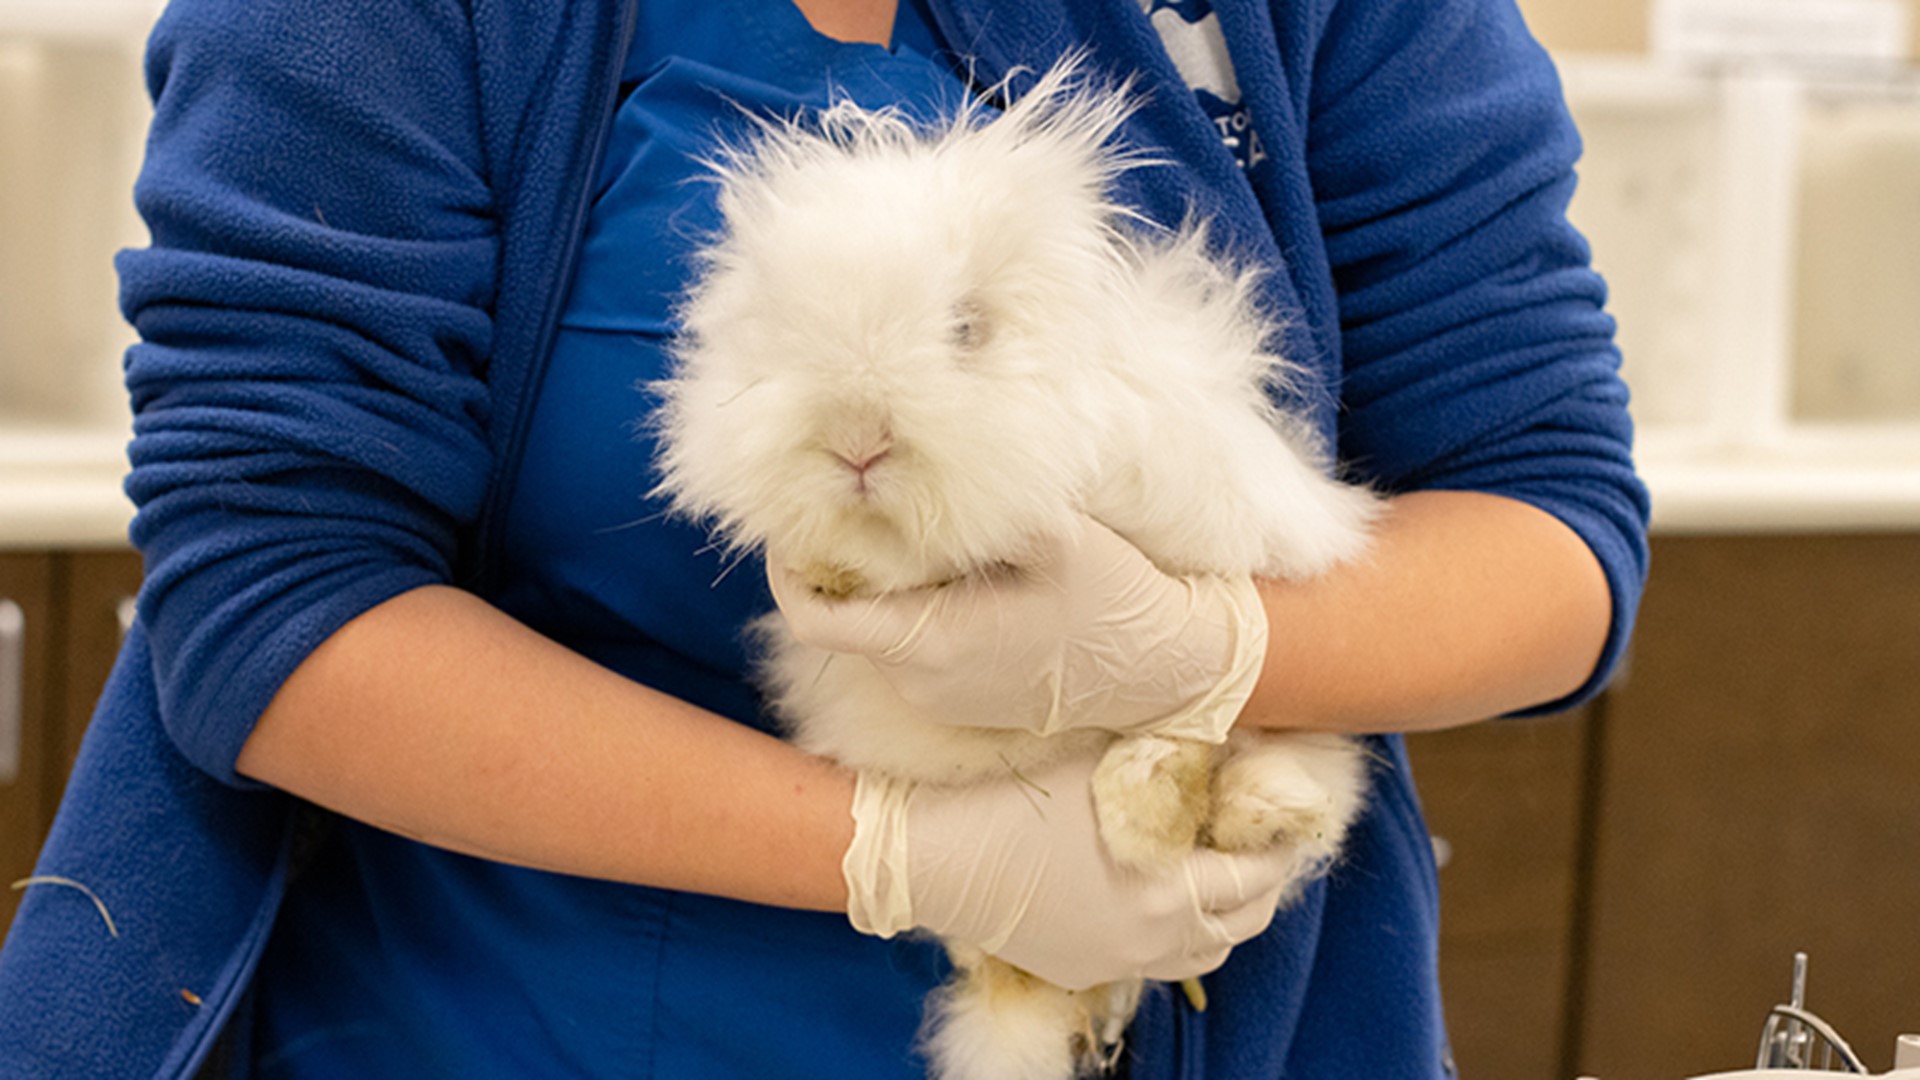 Twenty bunny rabbits rescued from deplorable conditions at a hoarder home in Glendale, Arizona will soon be up for adoption at the Houston SPCA.